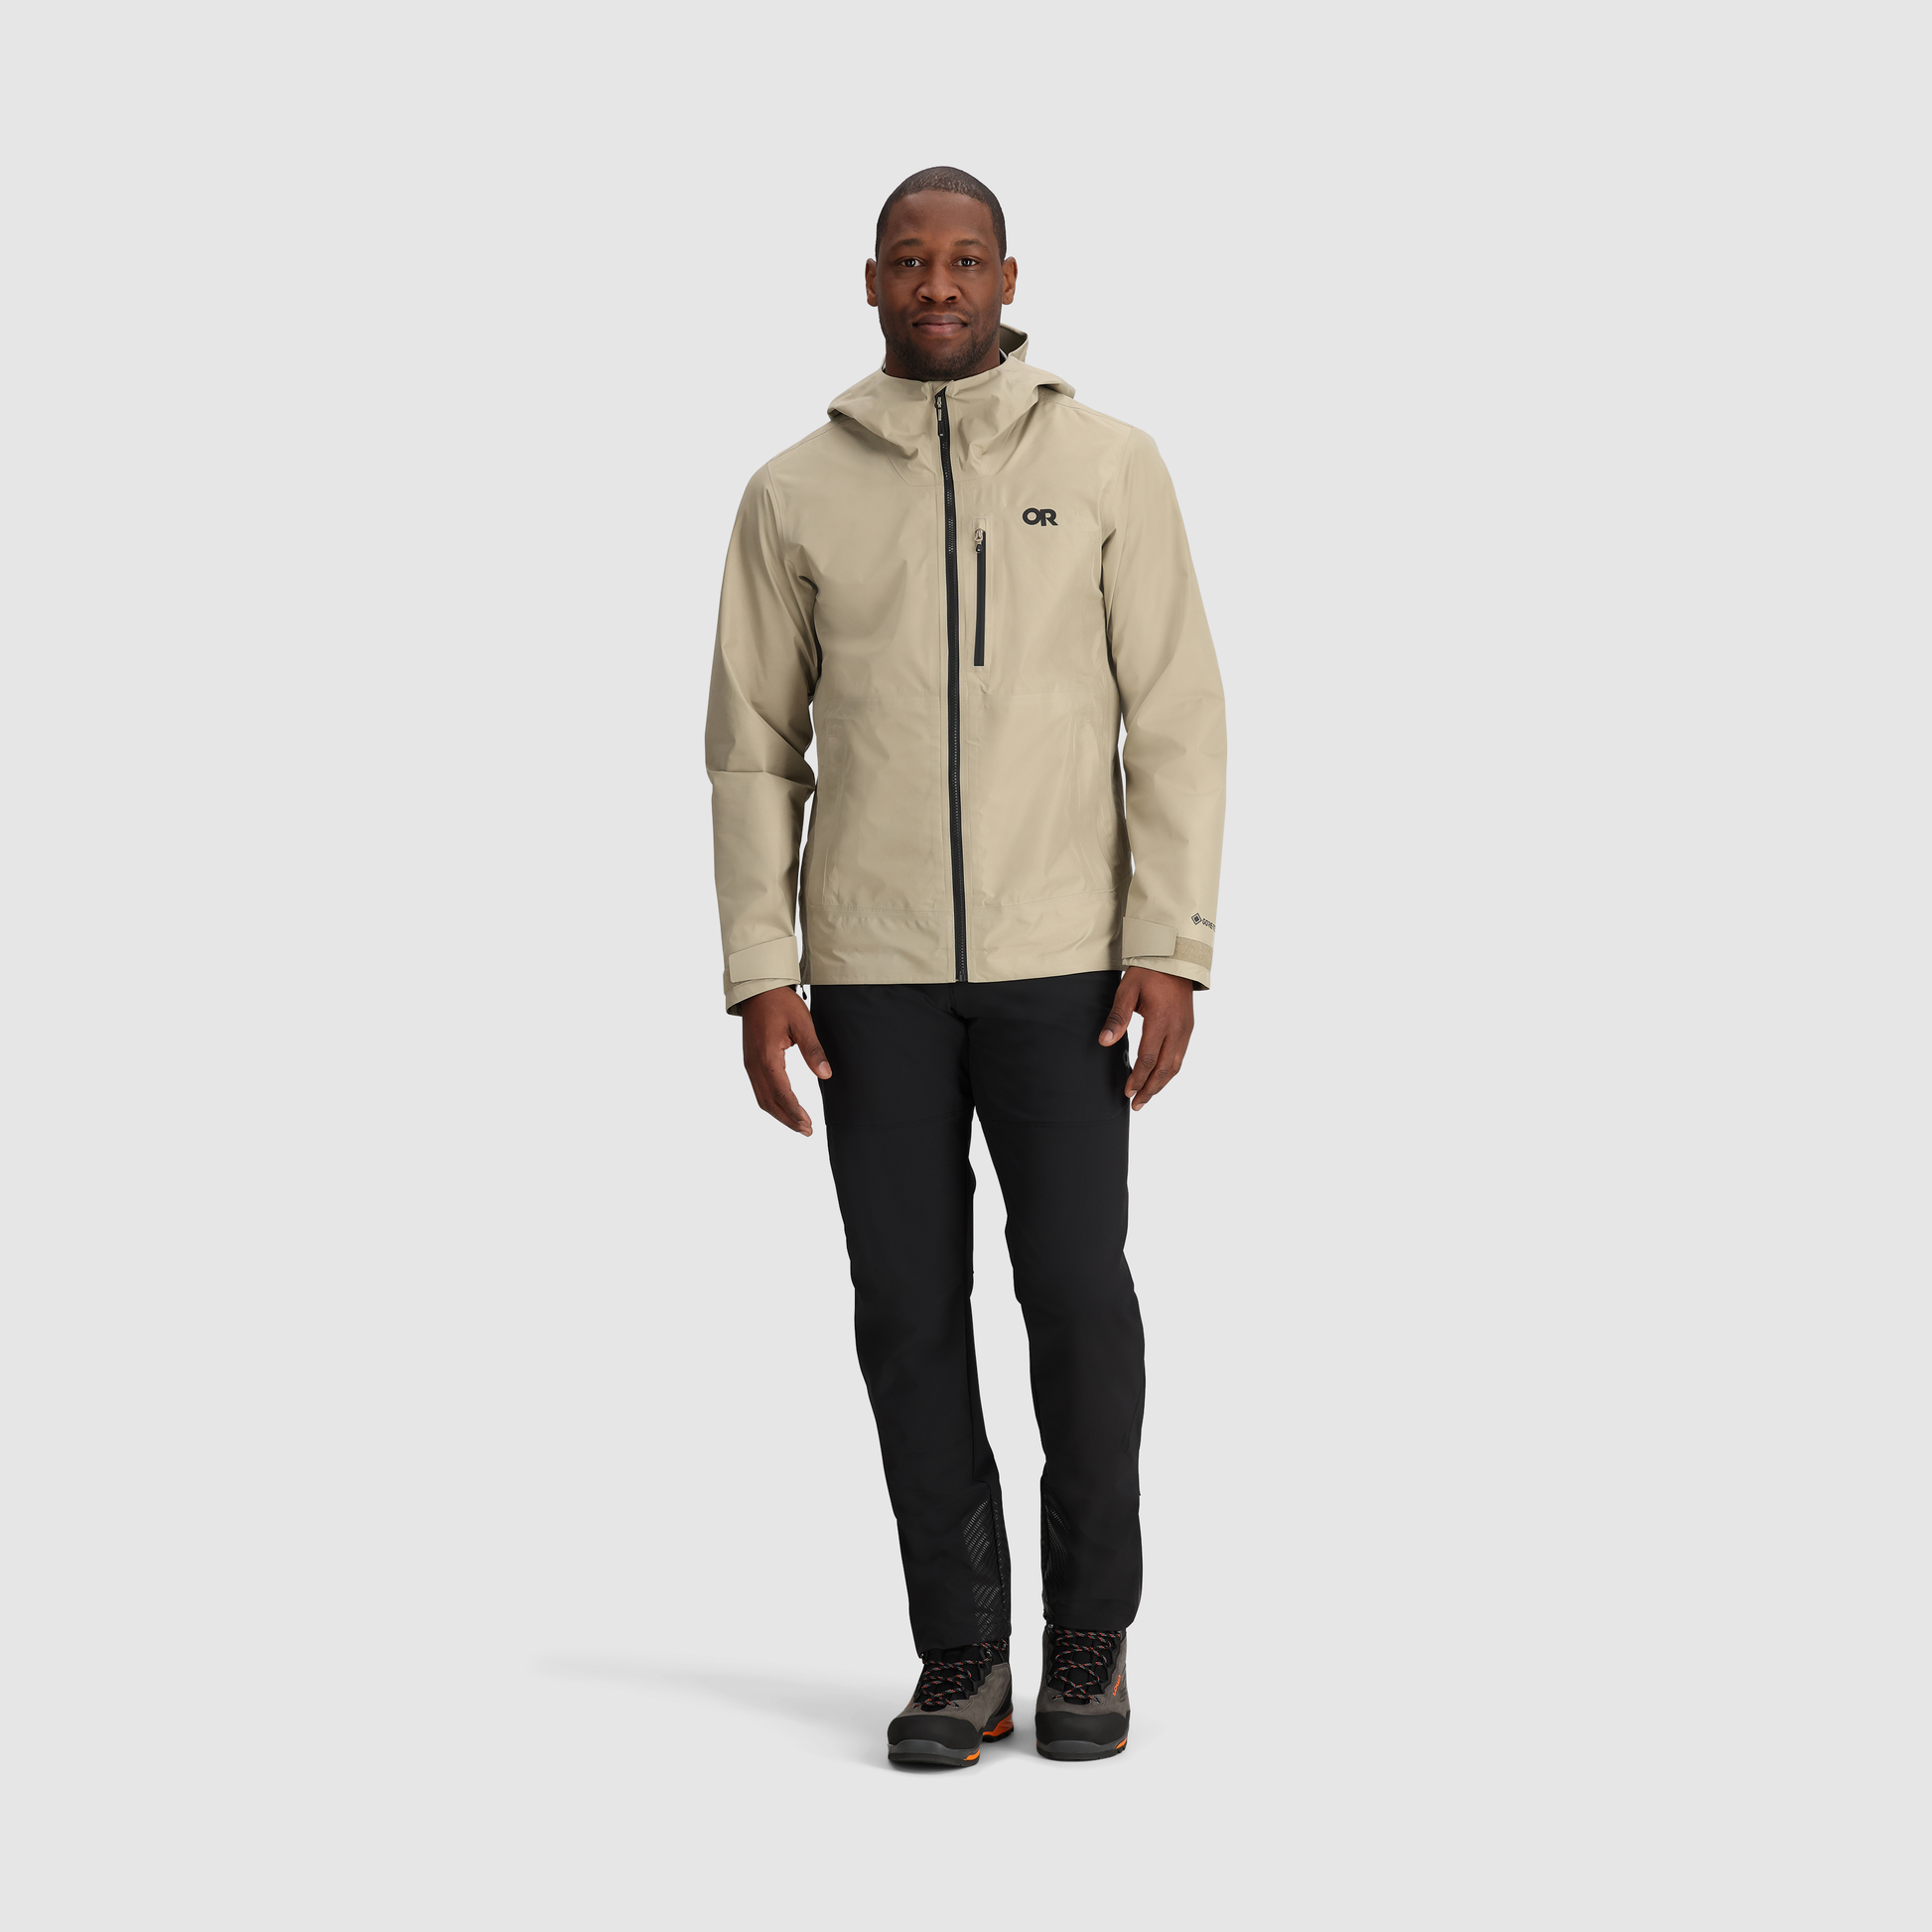 Outdoor Research Men's Foray Jacket – Campmor